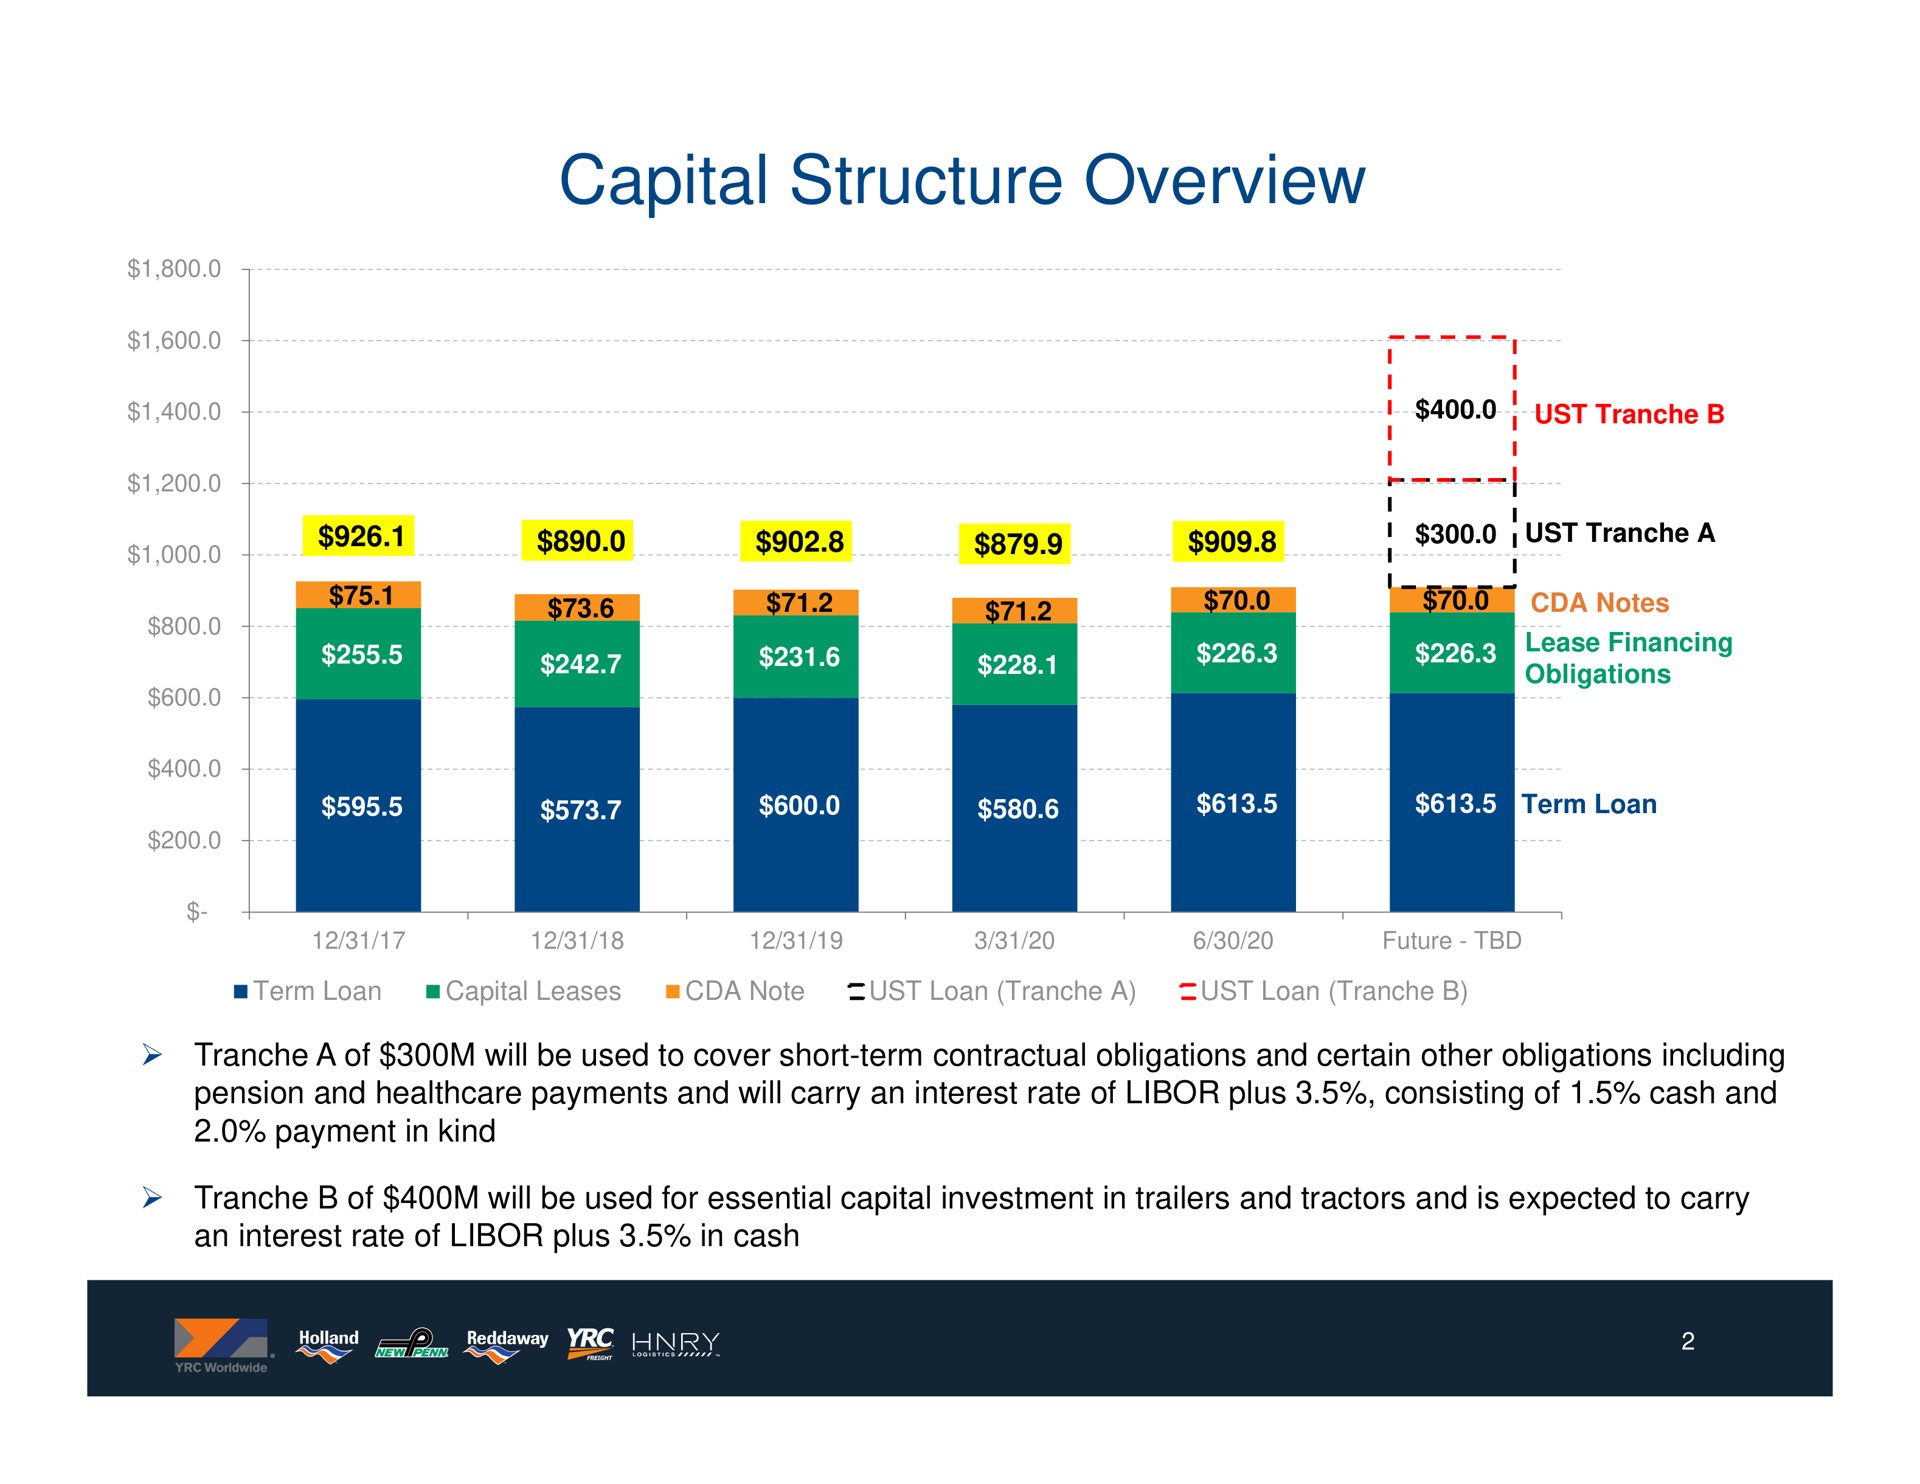 capital structure overview ust a | Yellow Corporation